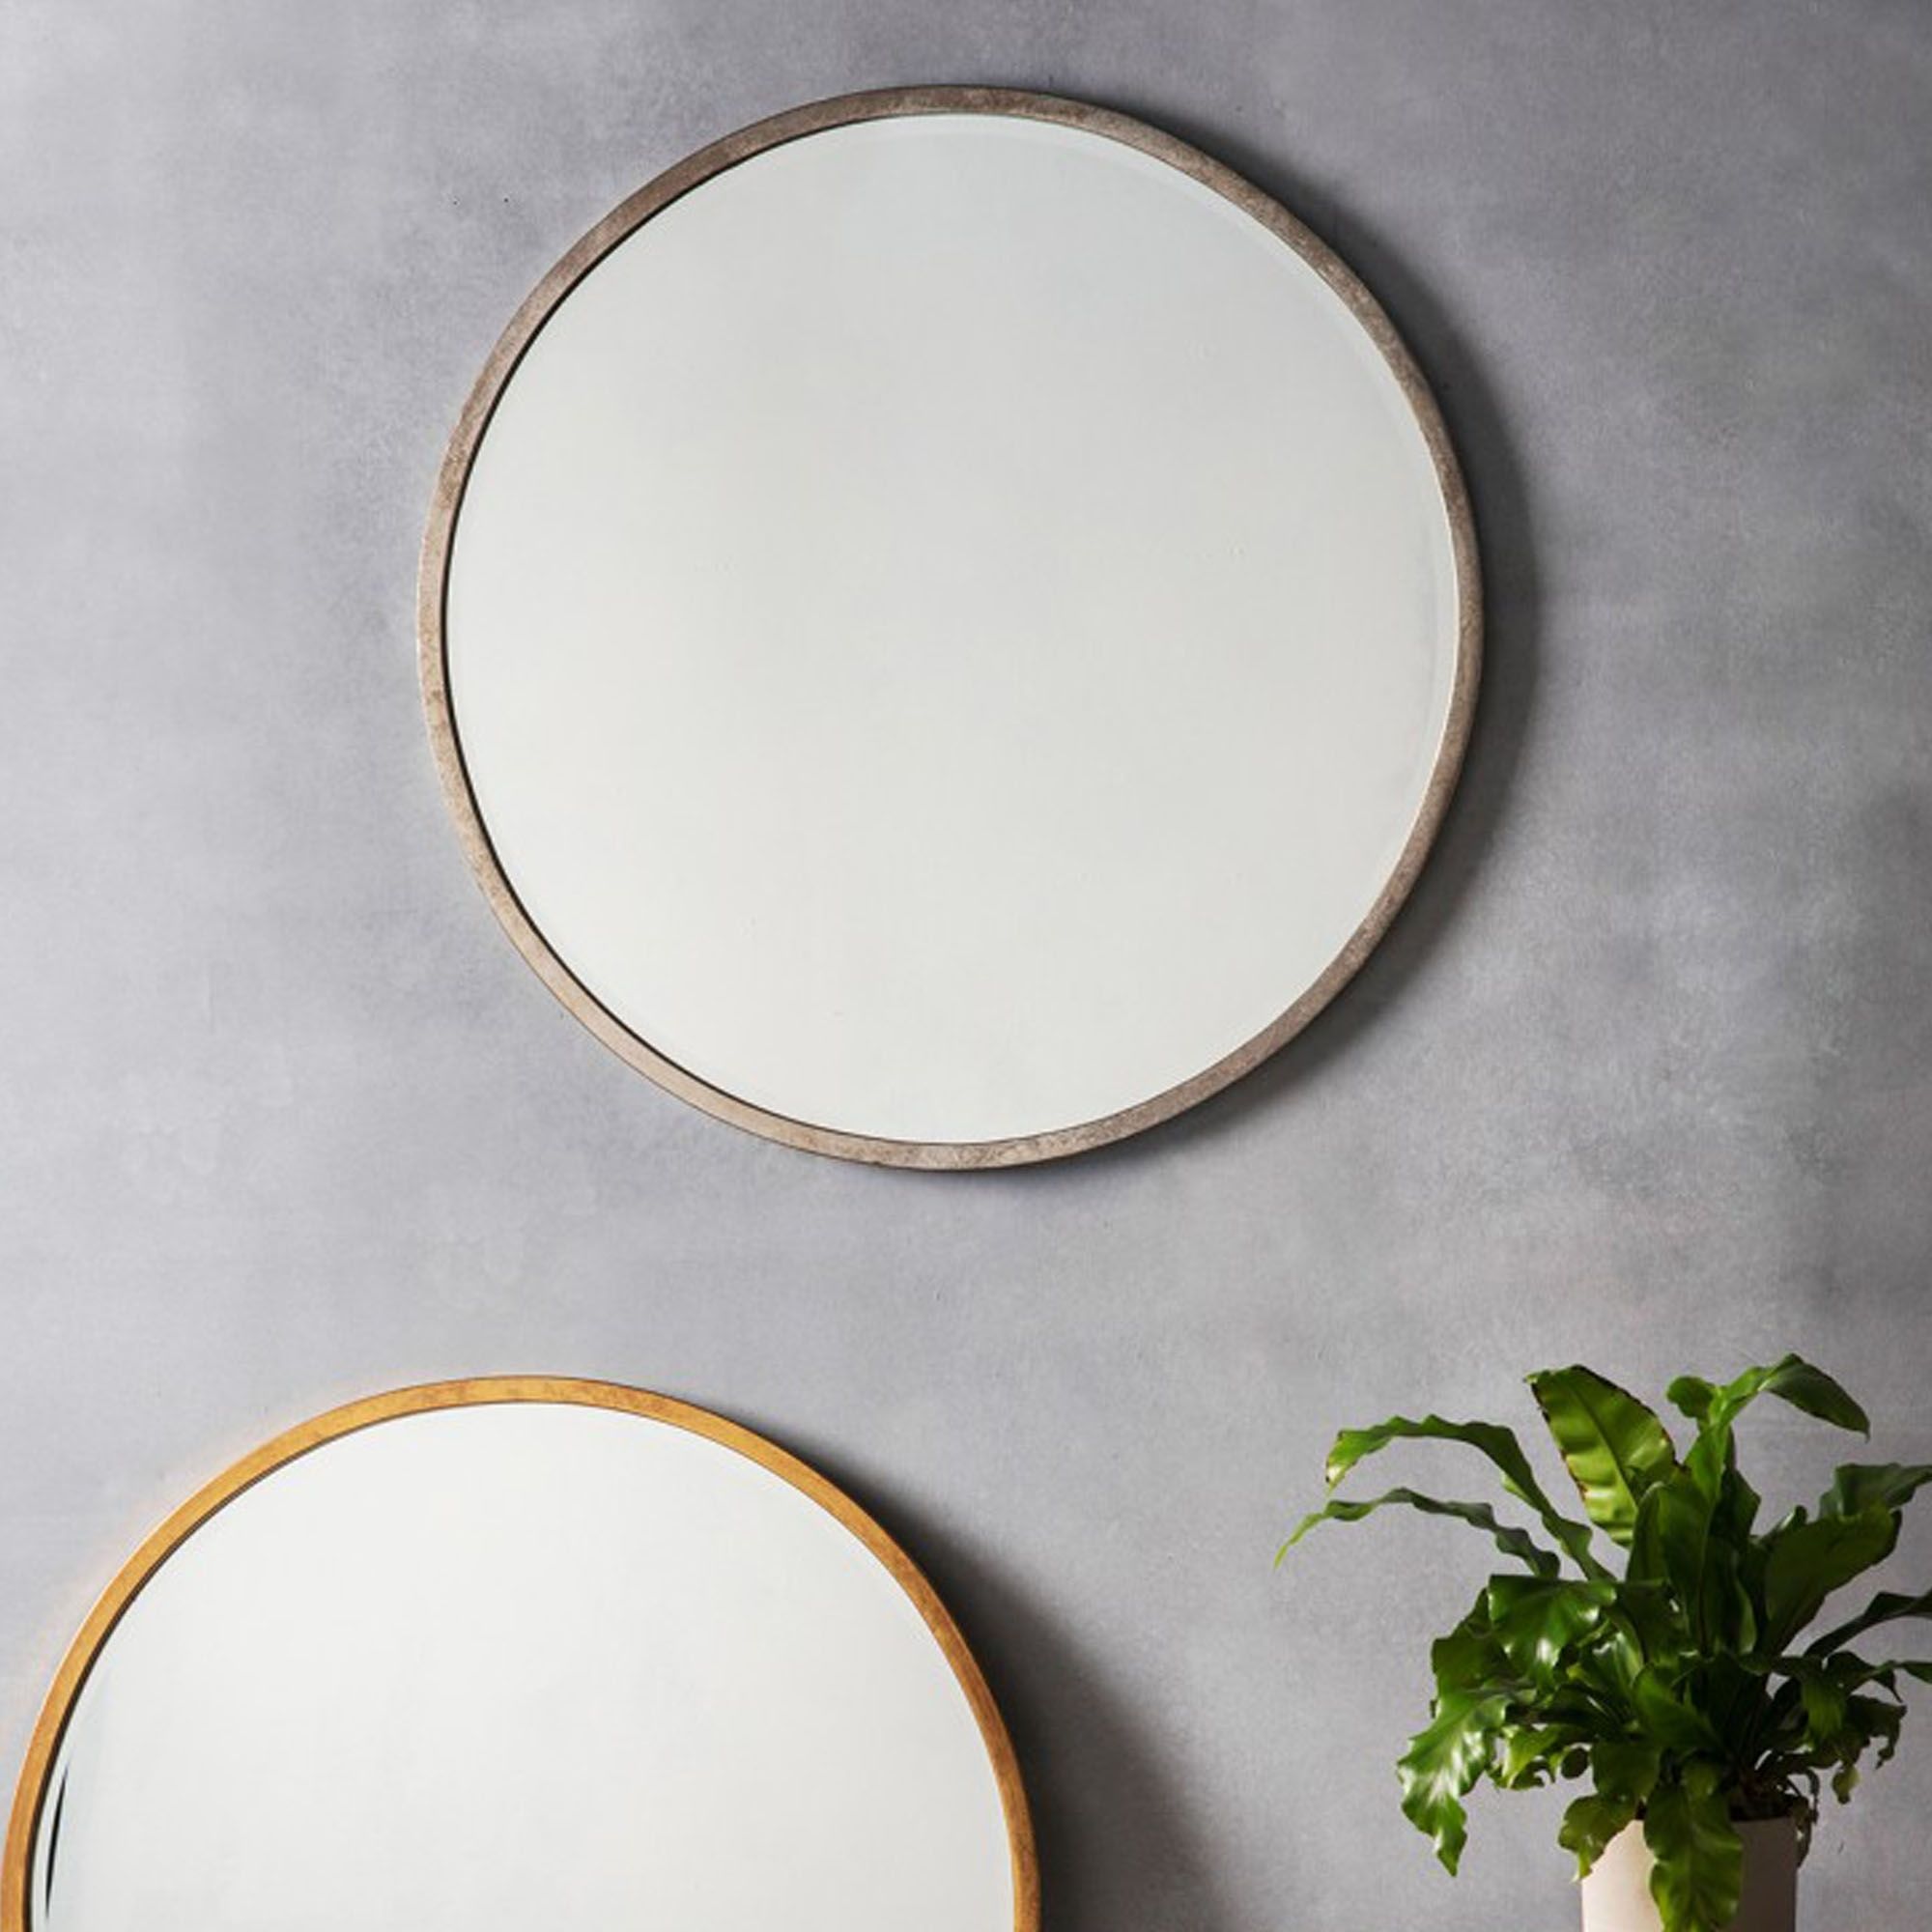 Higgins Antique Silver Round Wall Mirror |Wall Mirrors| Homesdirect365 For Scalloped Round Modern Oversized Wall Mirrors (View 11 of 15)